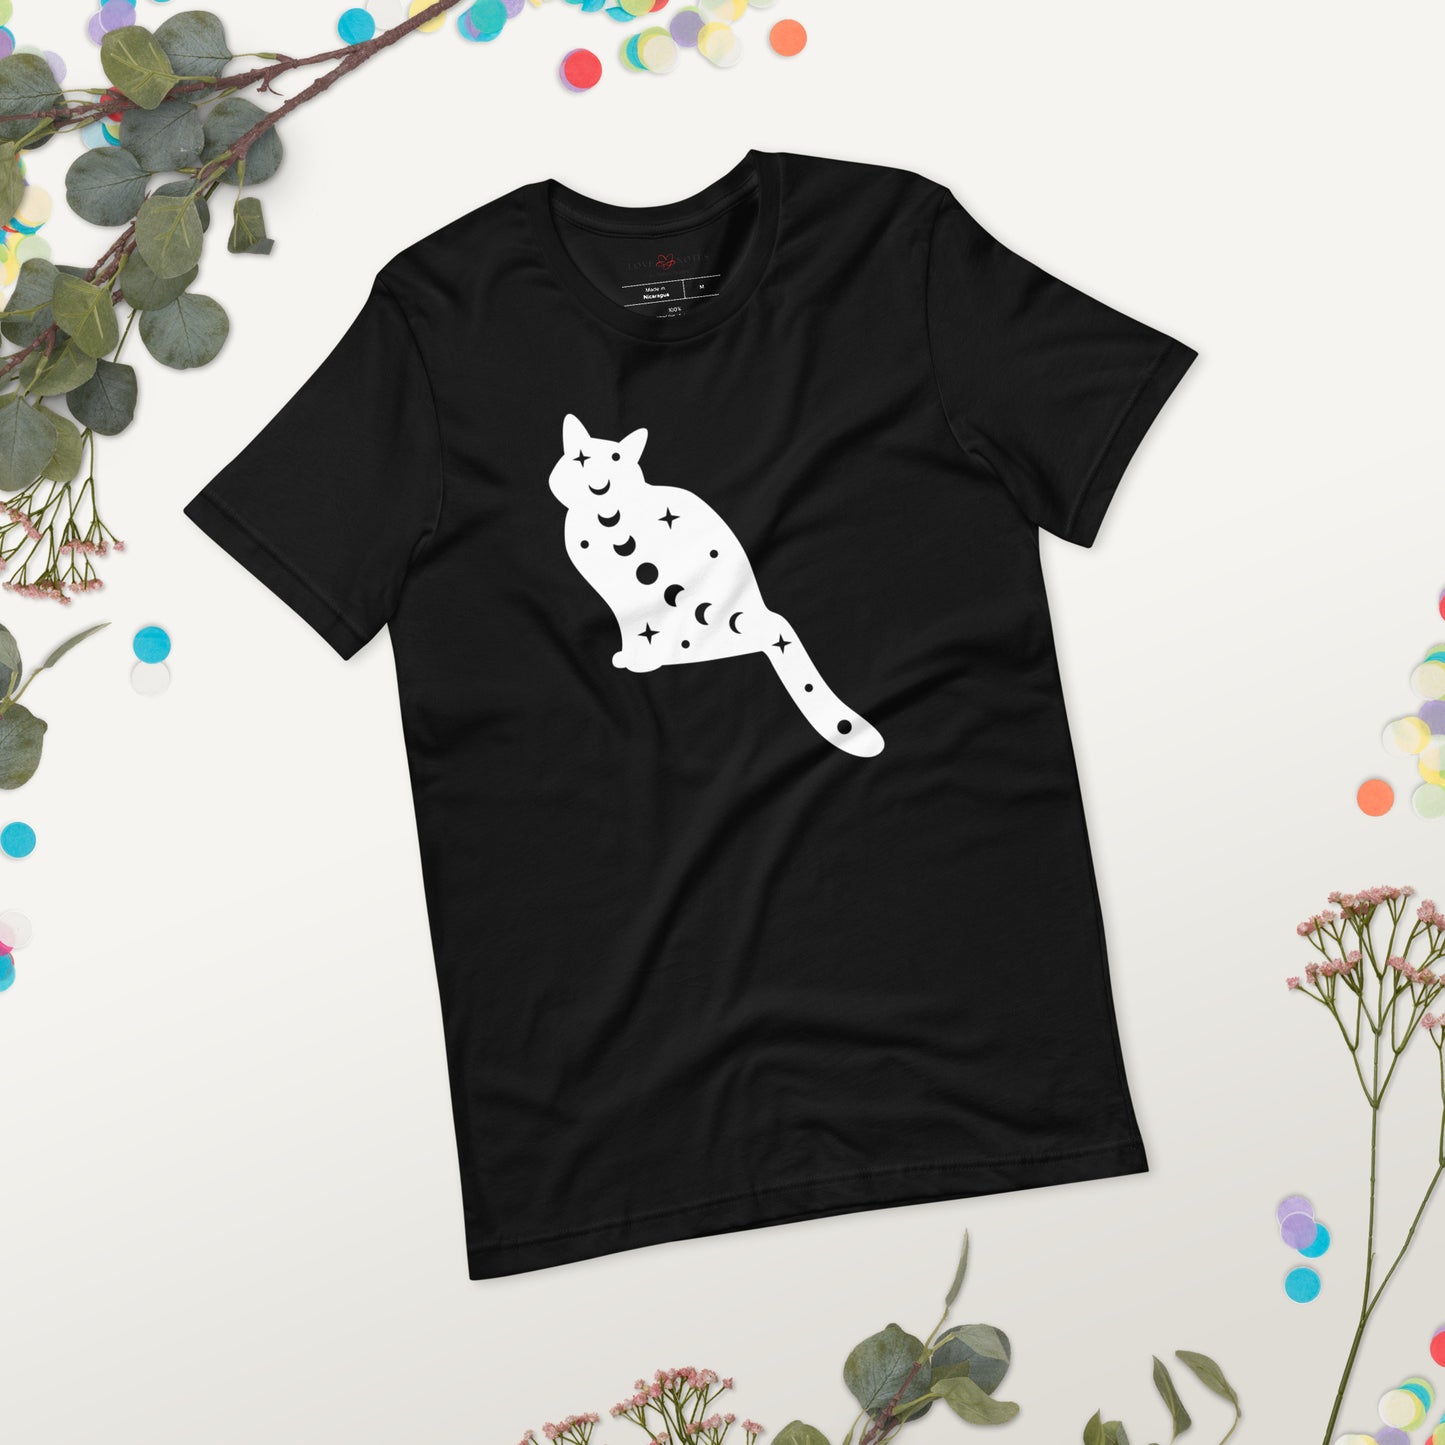 Unisex Tee: White Cat with Moon Phases